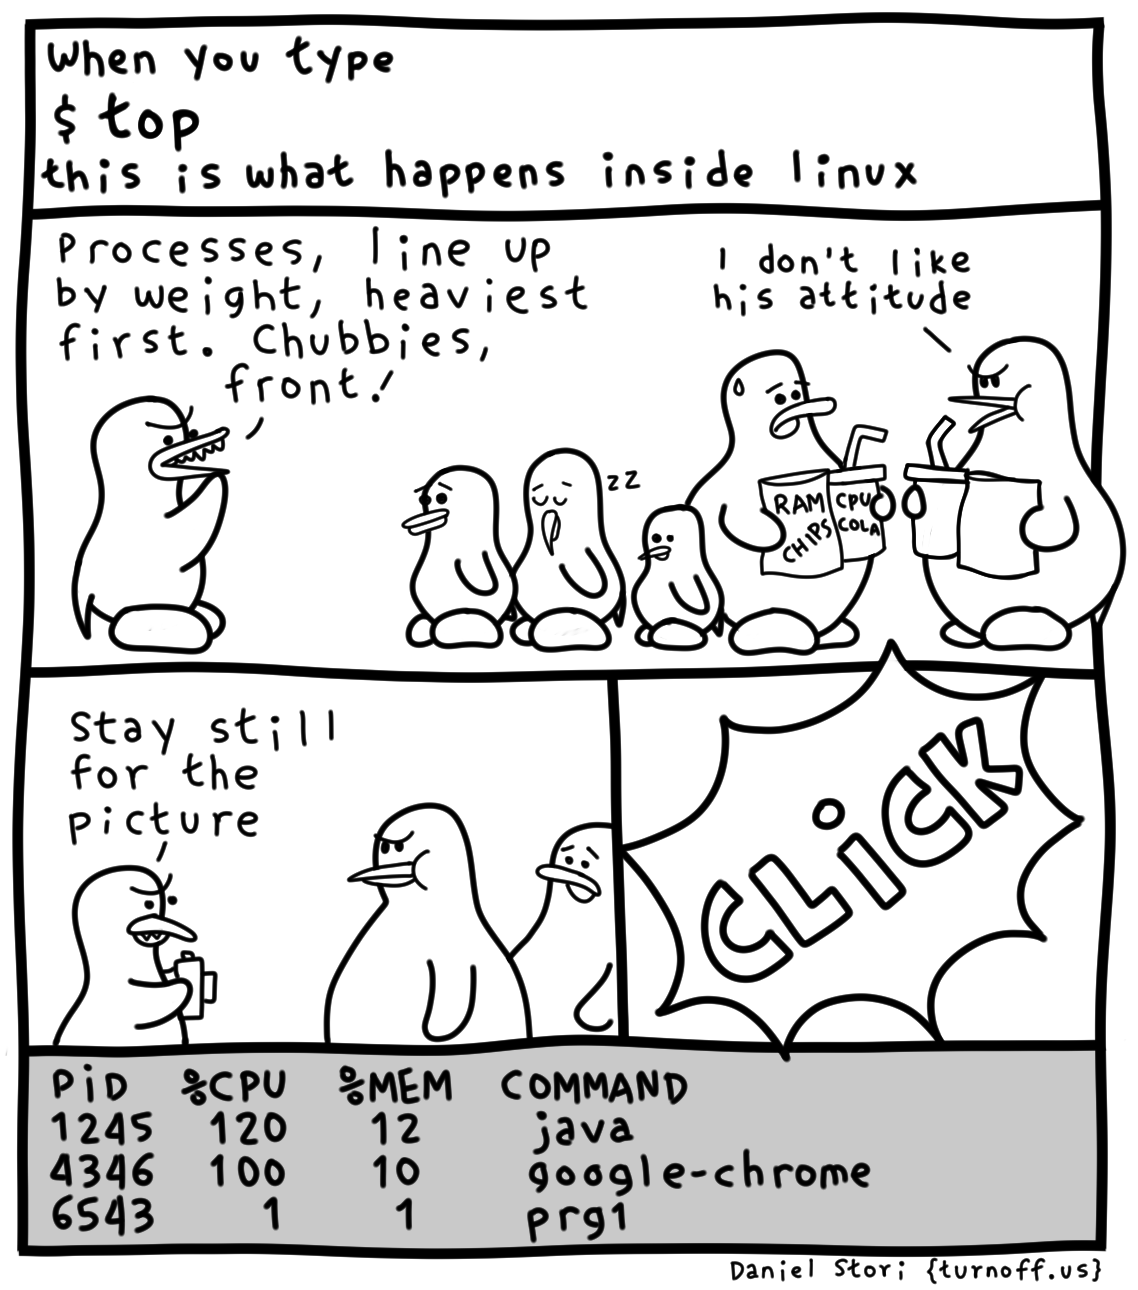 This comic try to explain what happens inside linux when you type the `top` command at the CLI. Credit https://turnoff.us/